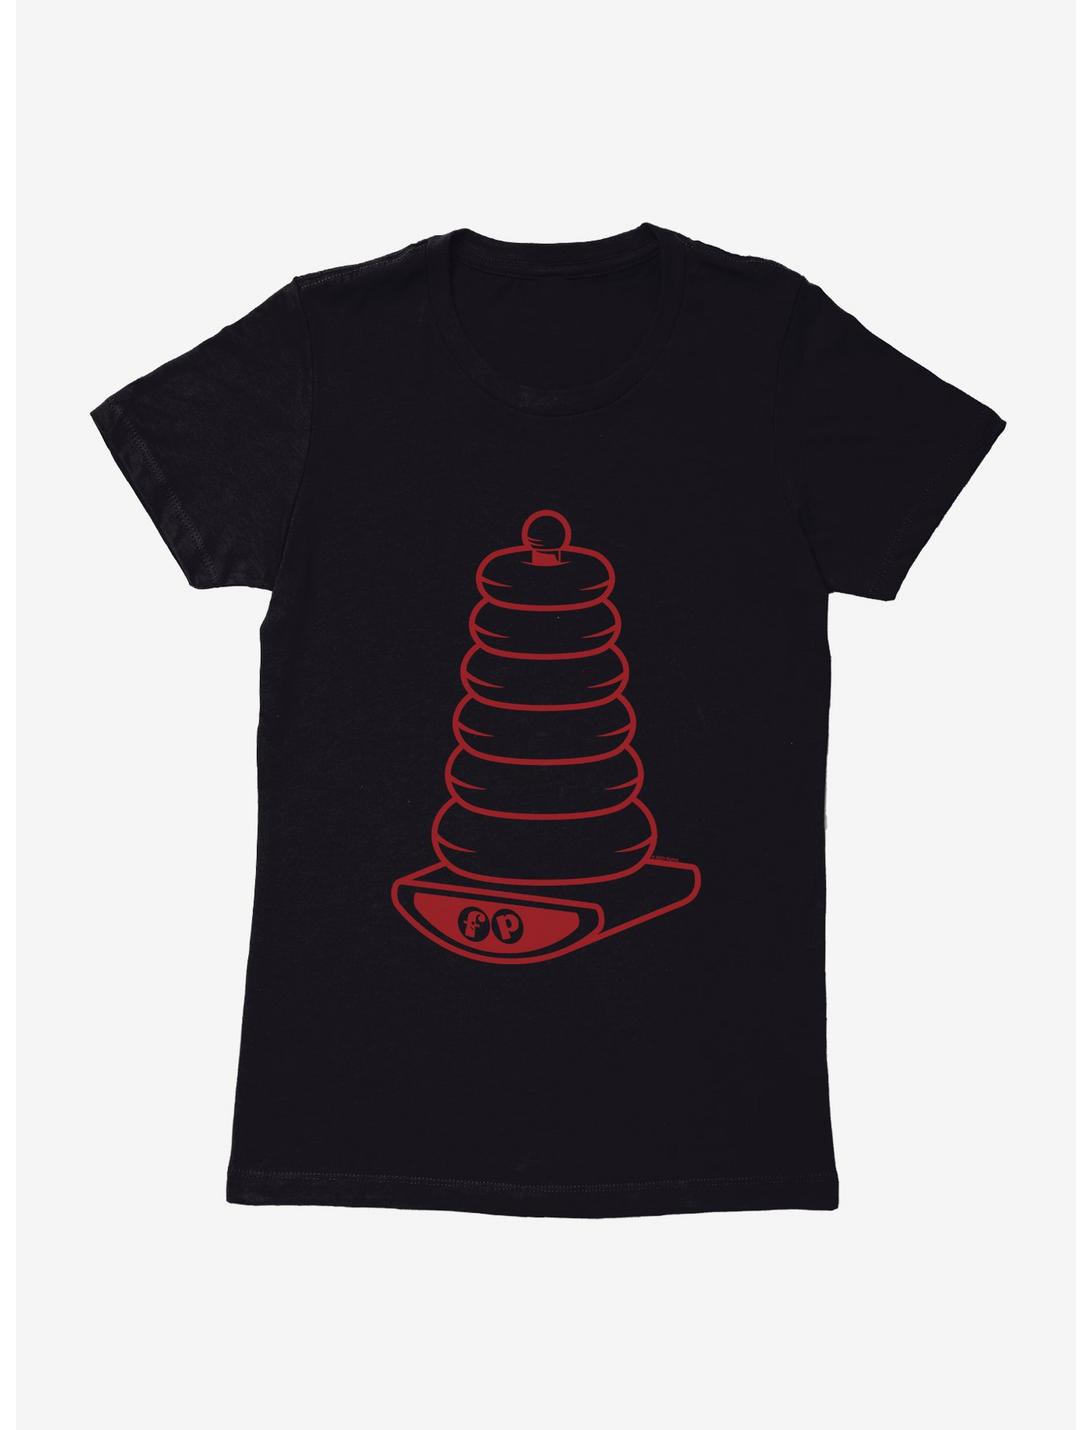 Fisher Price Rock-A-Stack Outline Womens T-Shirt, BLACK, hi-res